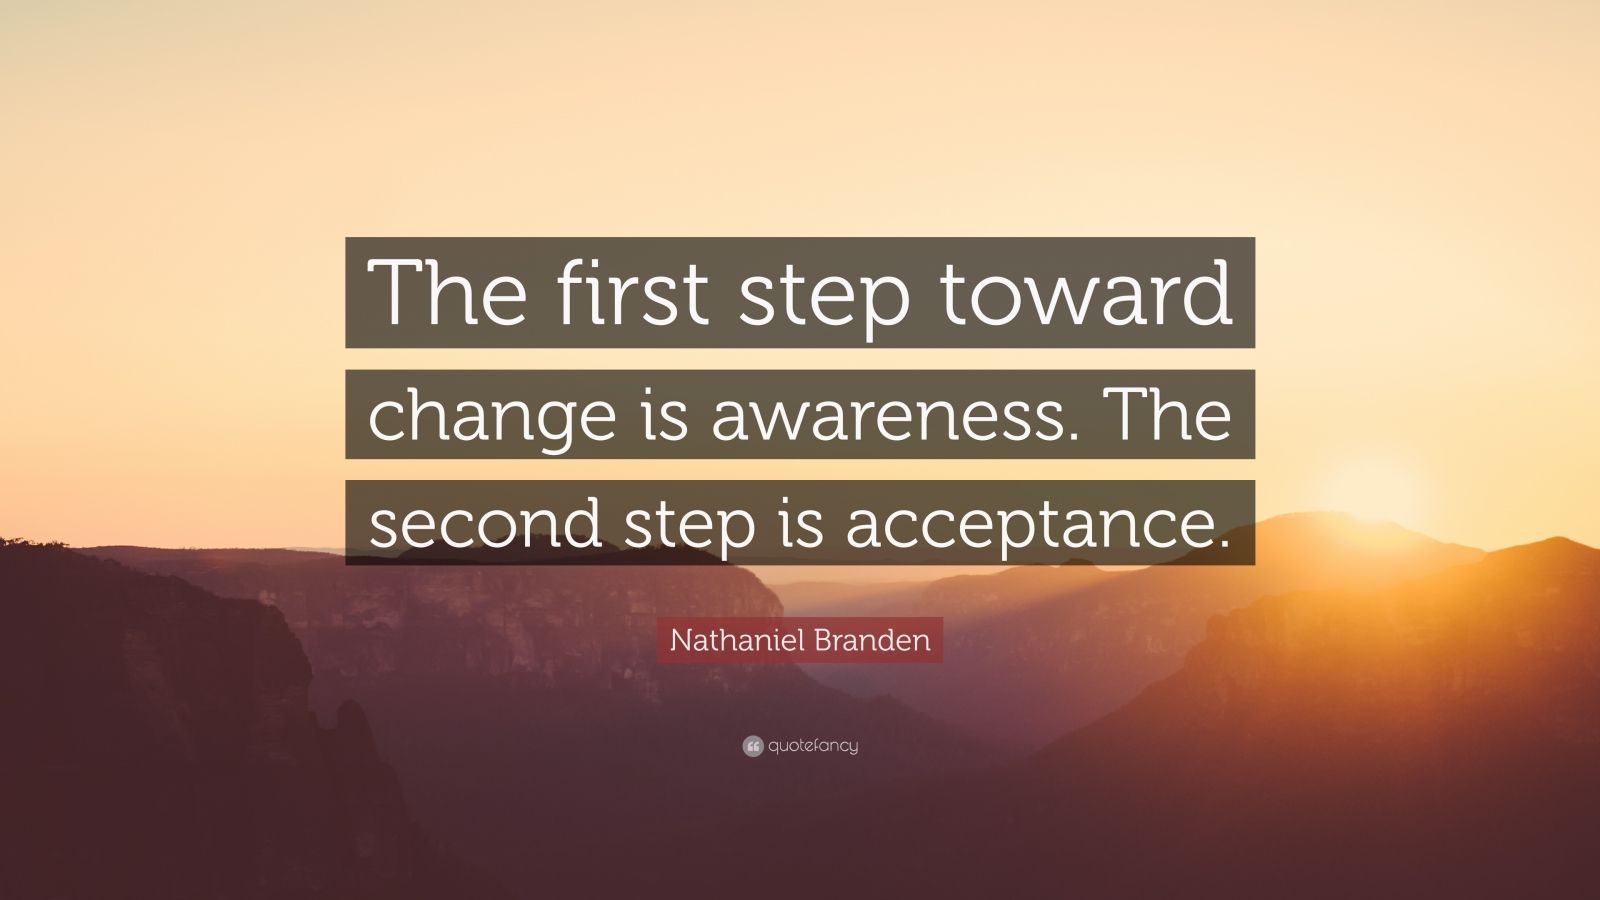 Nathaniel Branden Quote: “The first step toward change is awareness ...